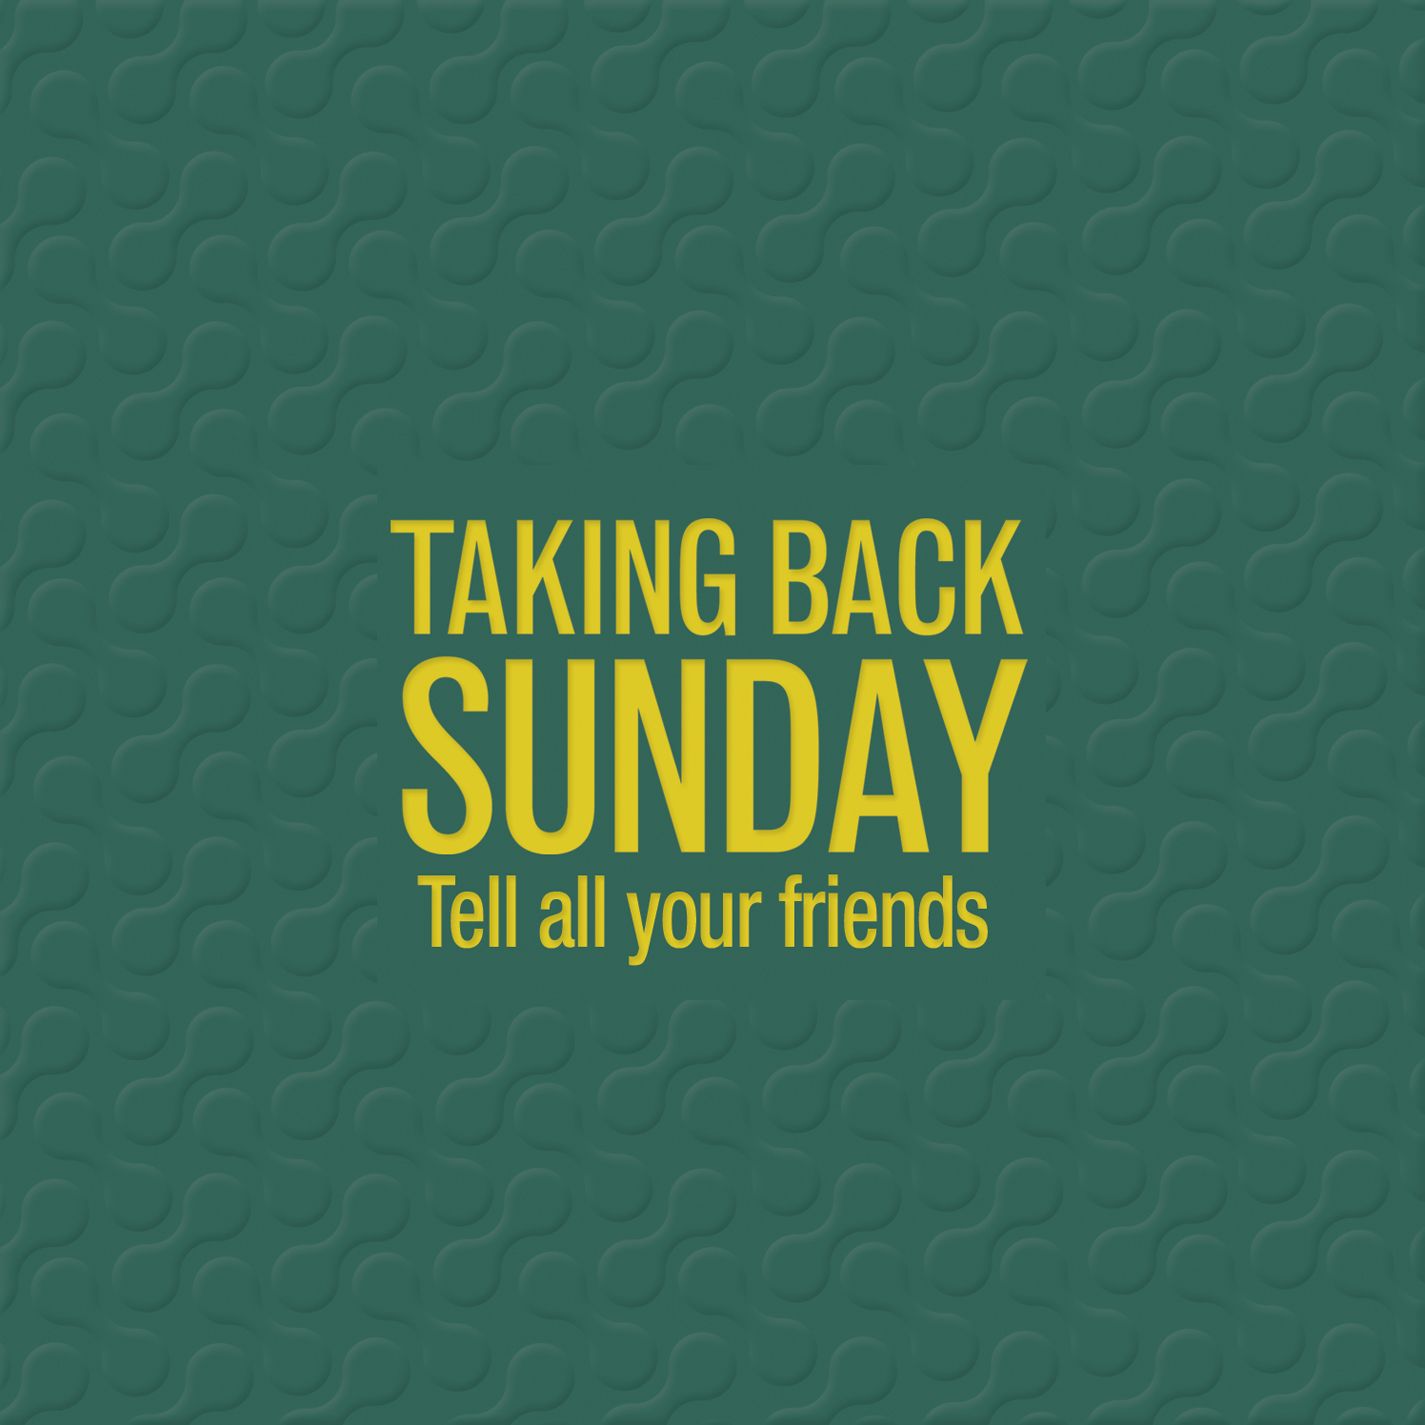 Taking Back Sunday Tell All Your Friends 38950 MOVDATA